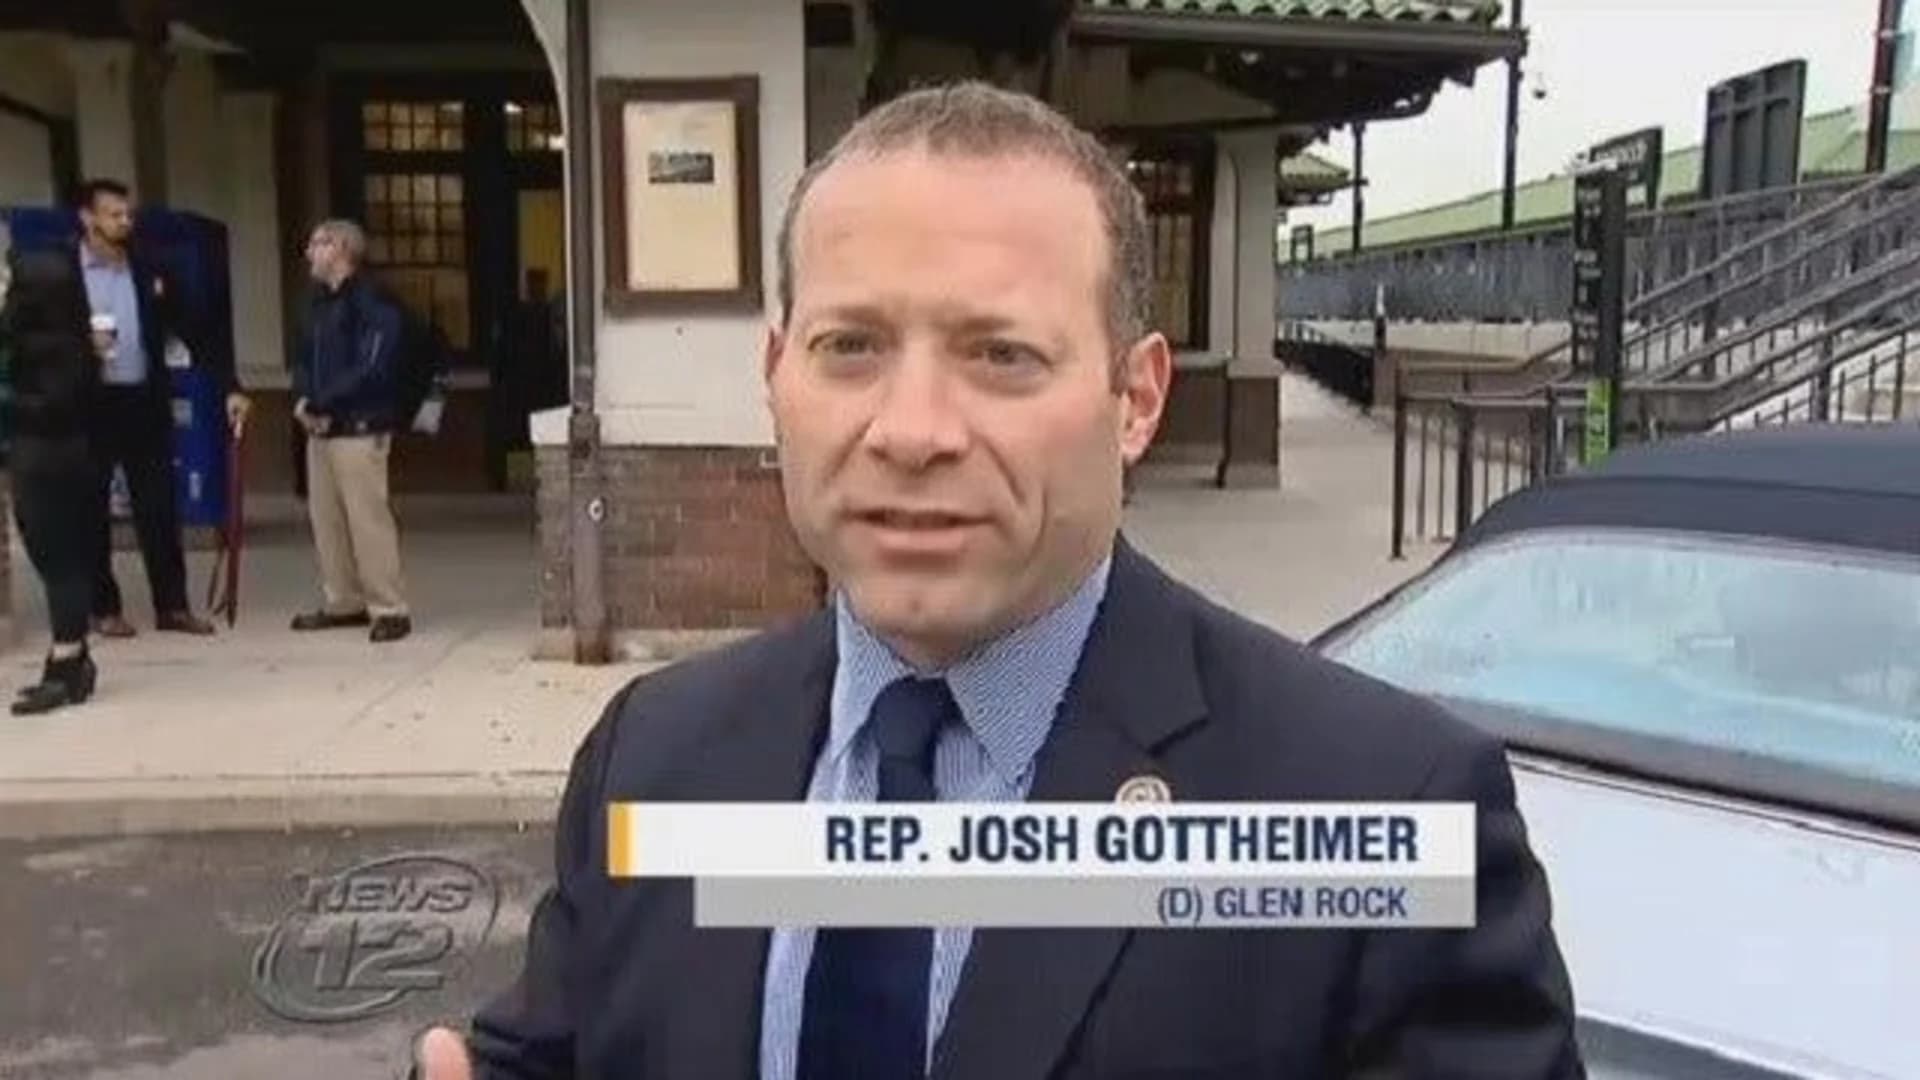 Rep. Gottheimer rides NJ Transit, asks commuters to share stories